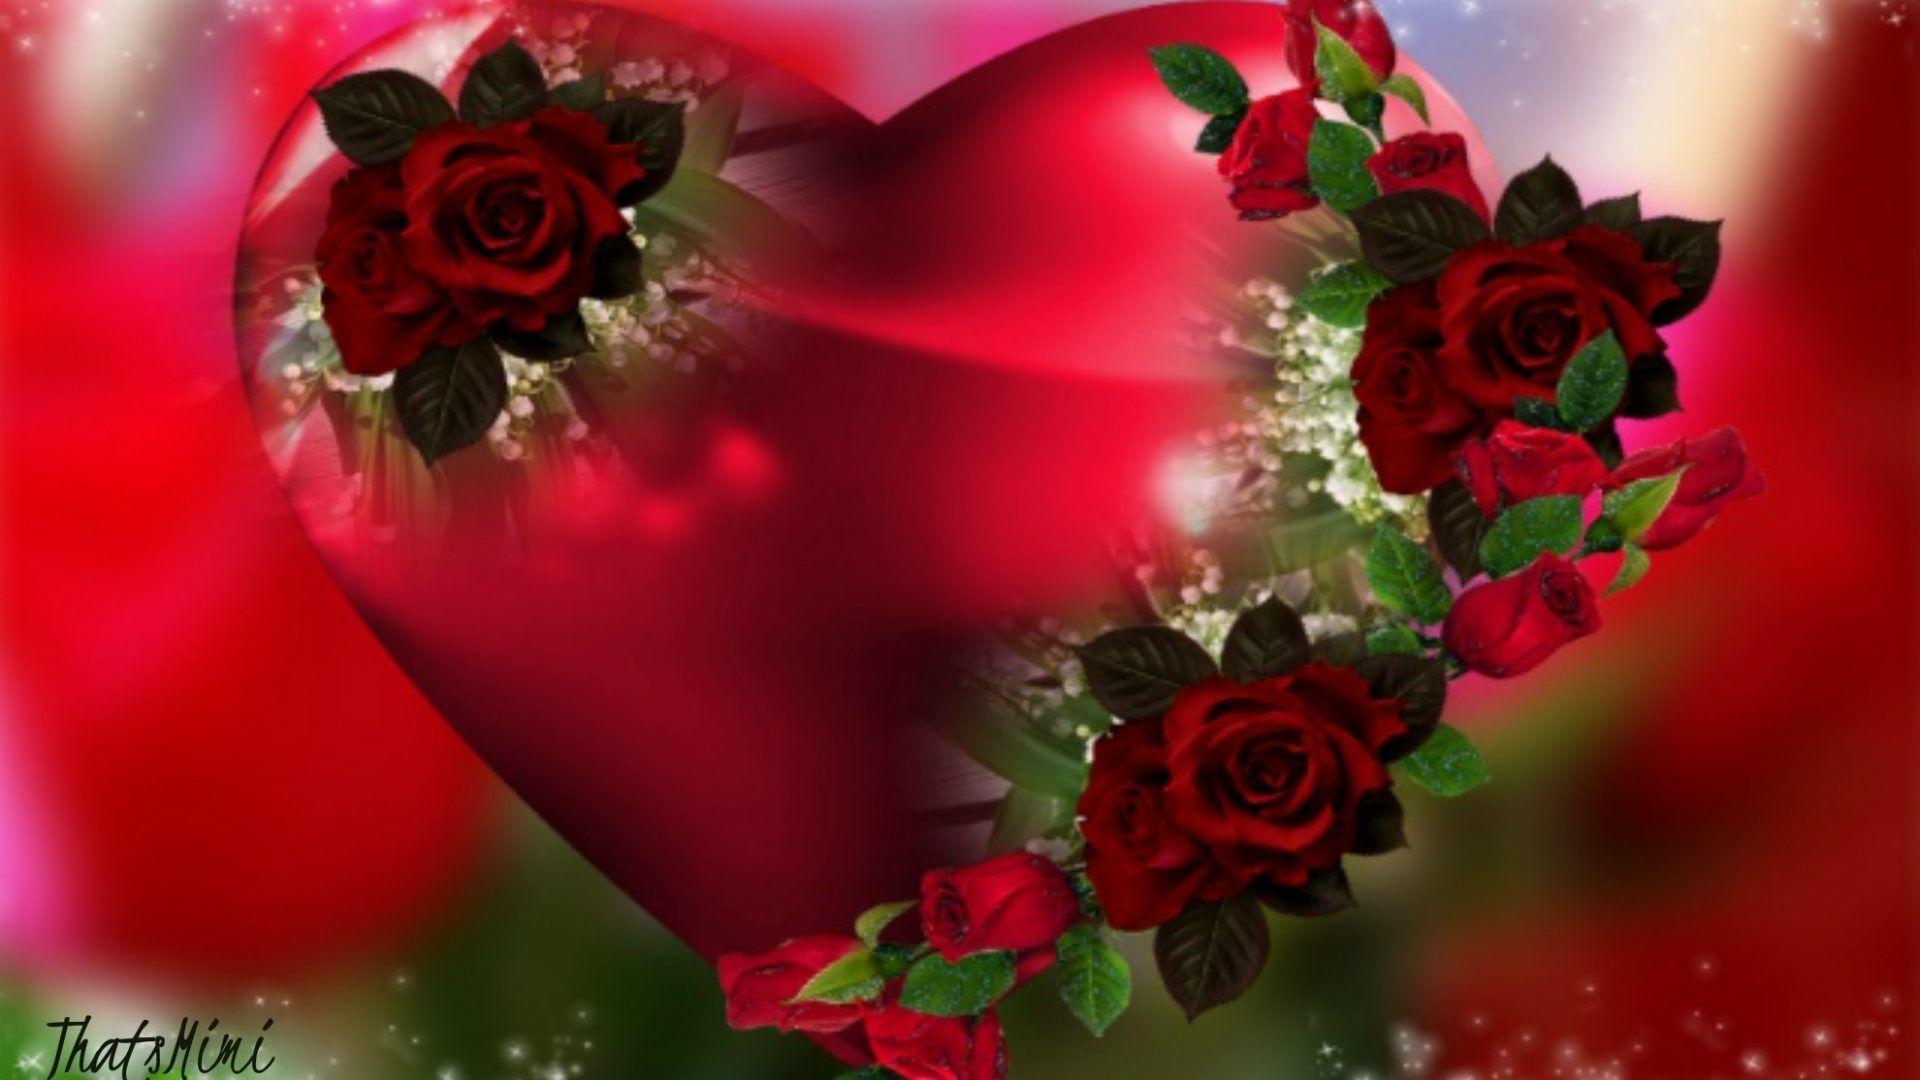 Love Roses And Hearts Wallpapers - Wallpaper Cave